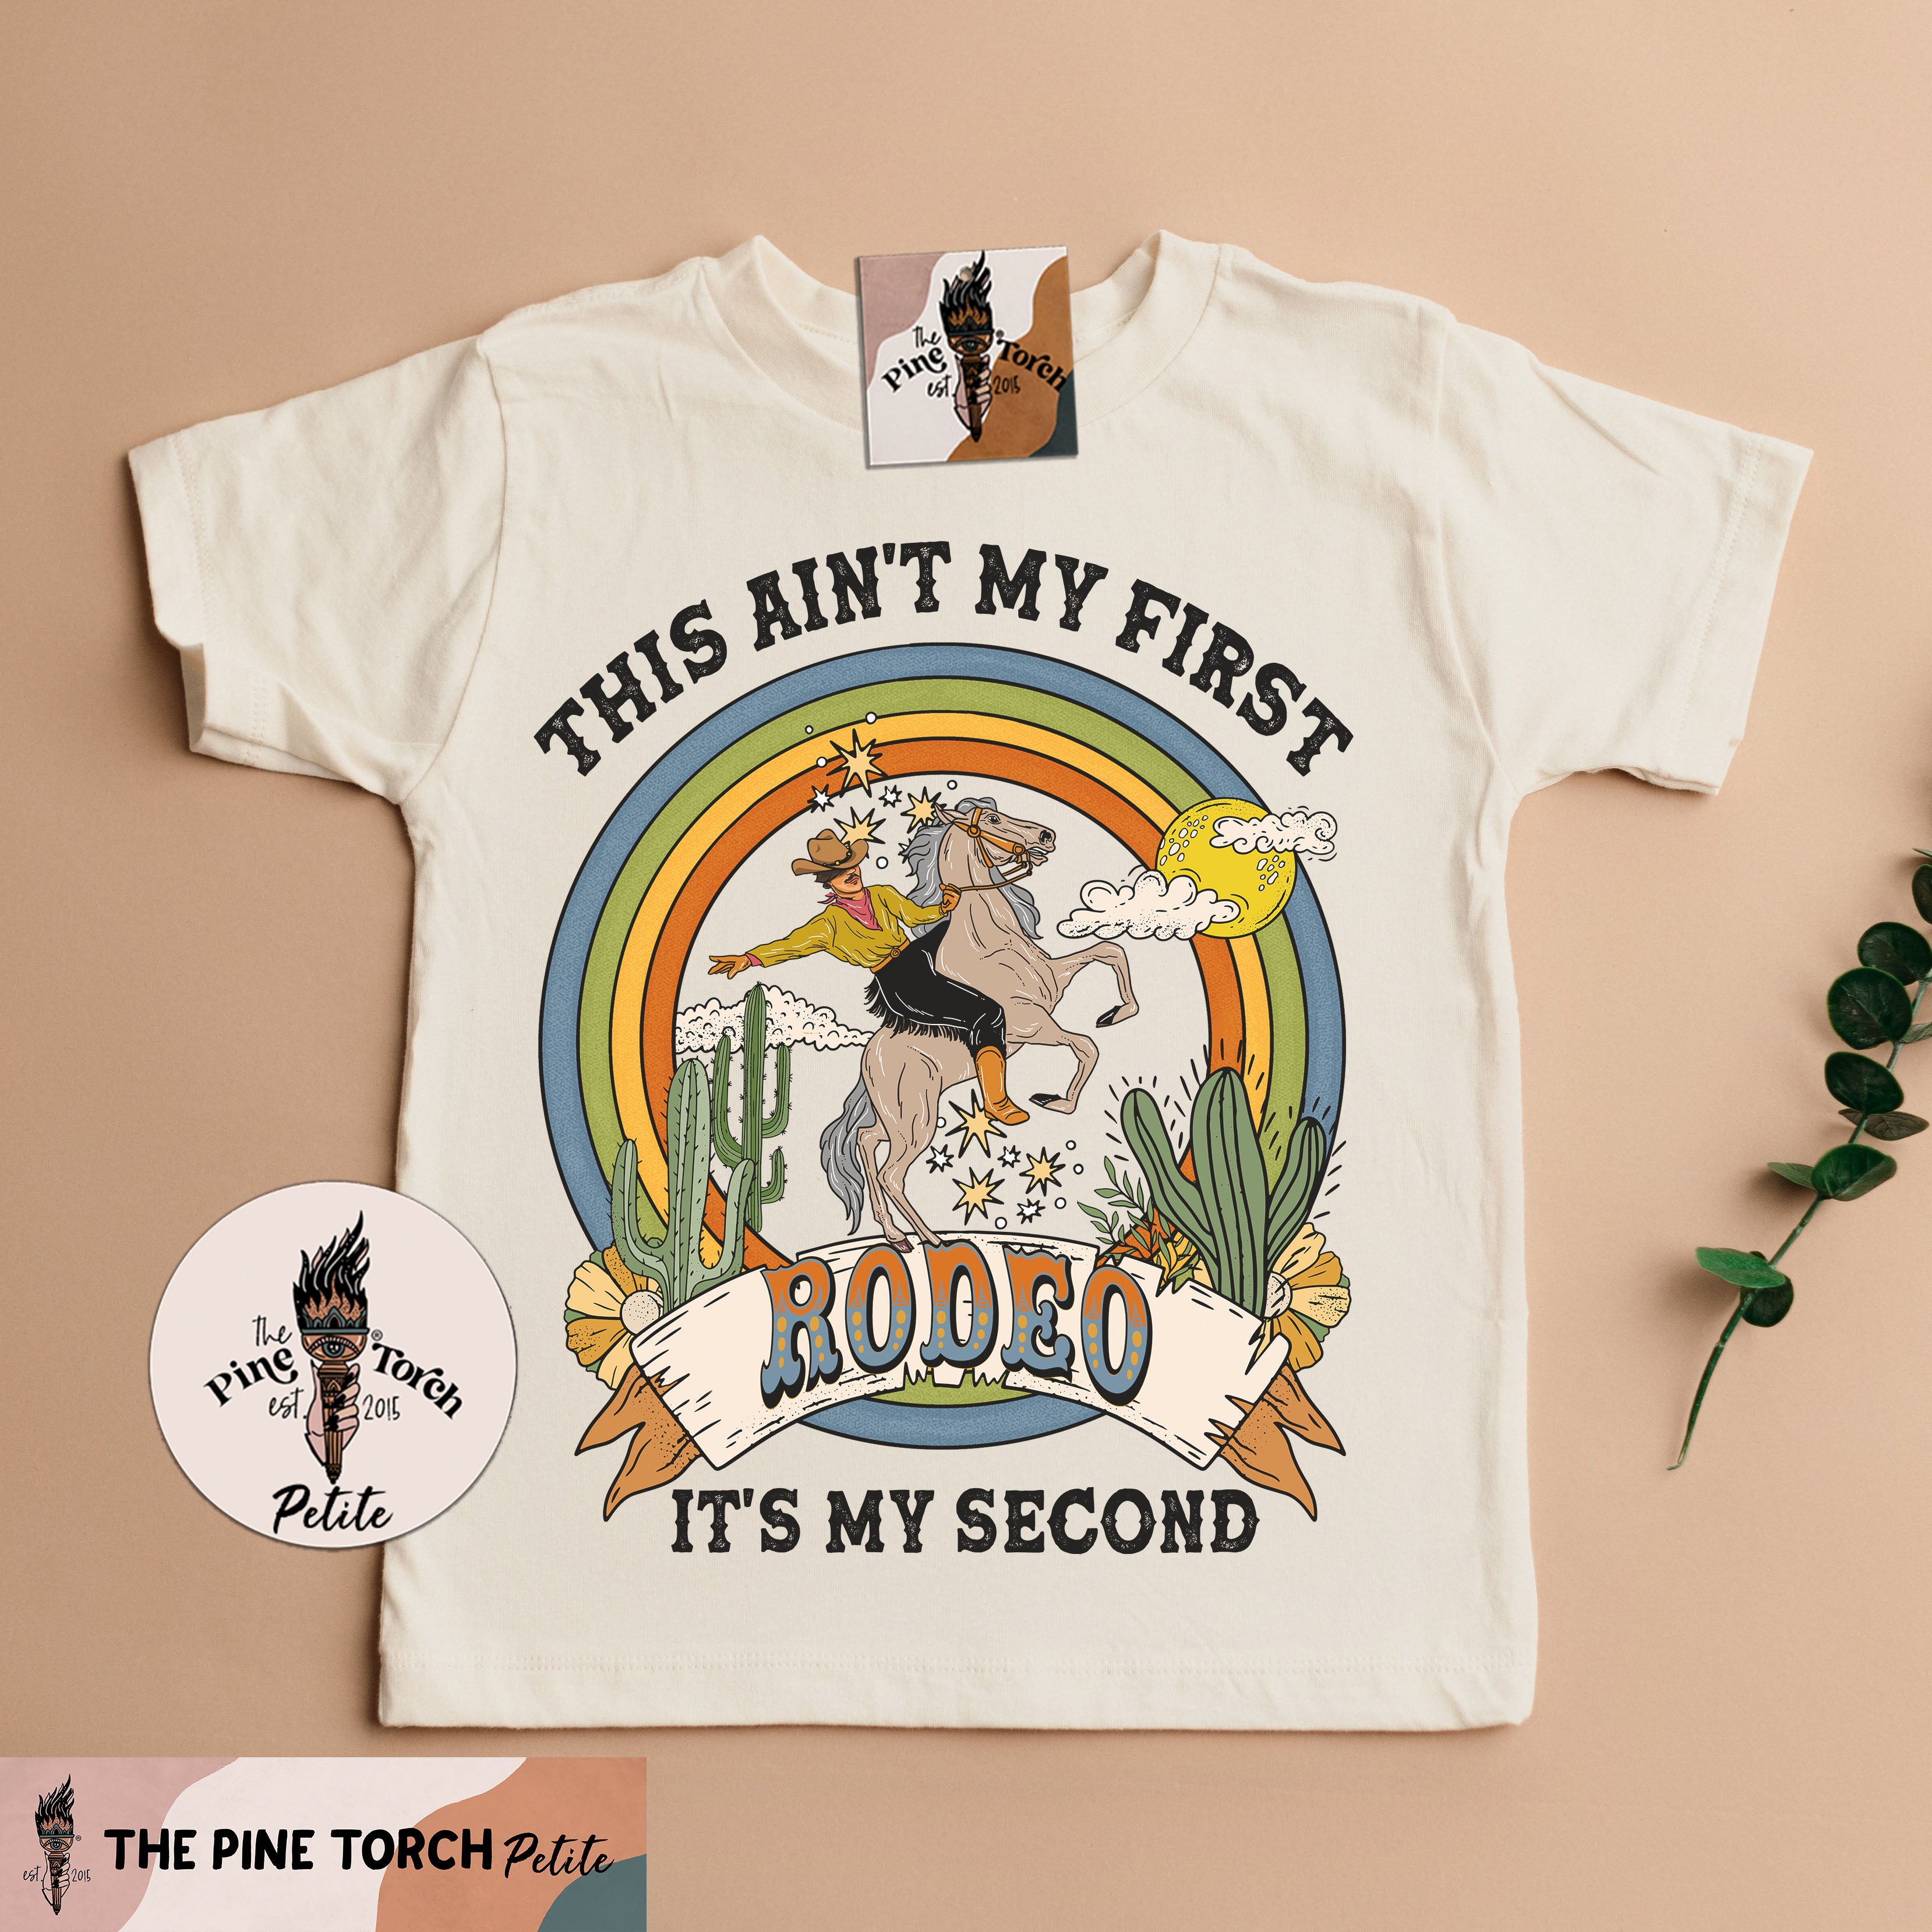 « THIS AIN'T MY FIRST RODEO, IT'S MY SECOND » KID'S TEE